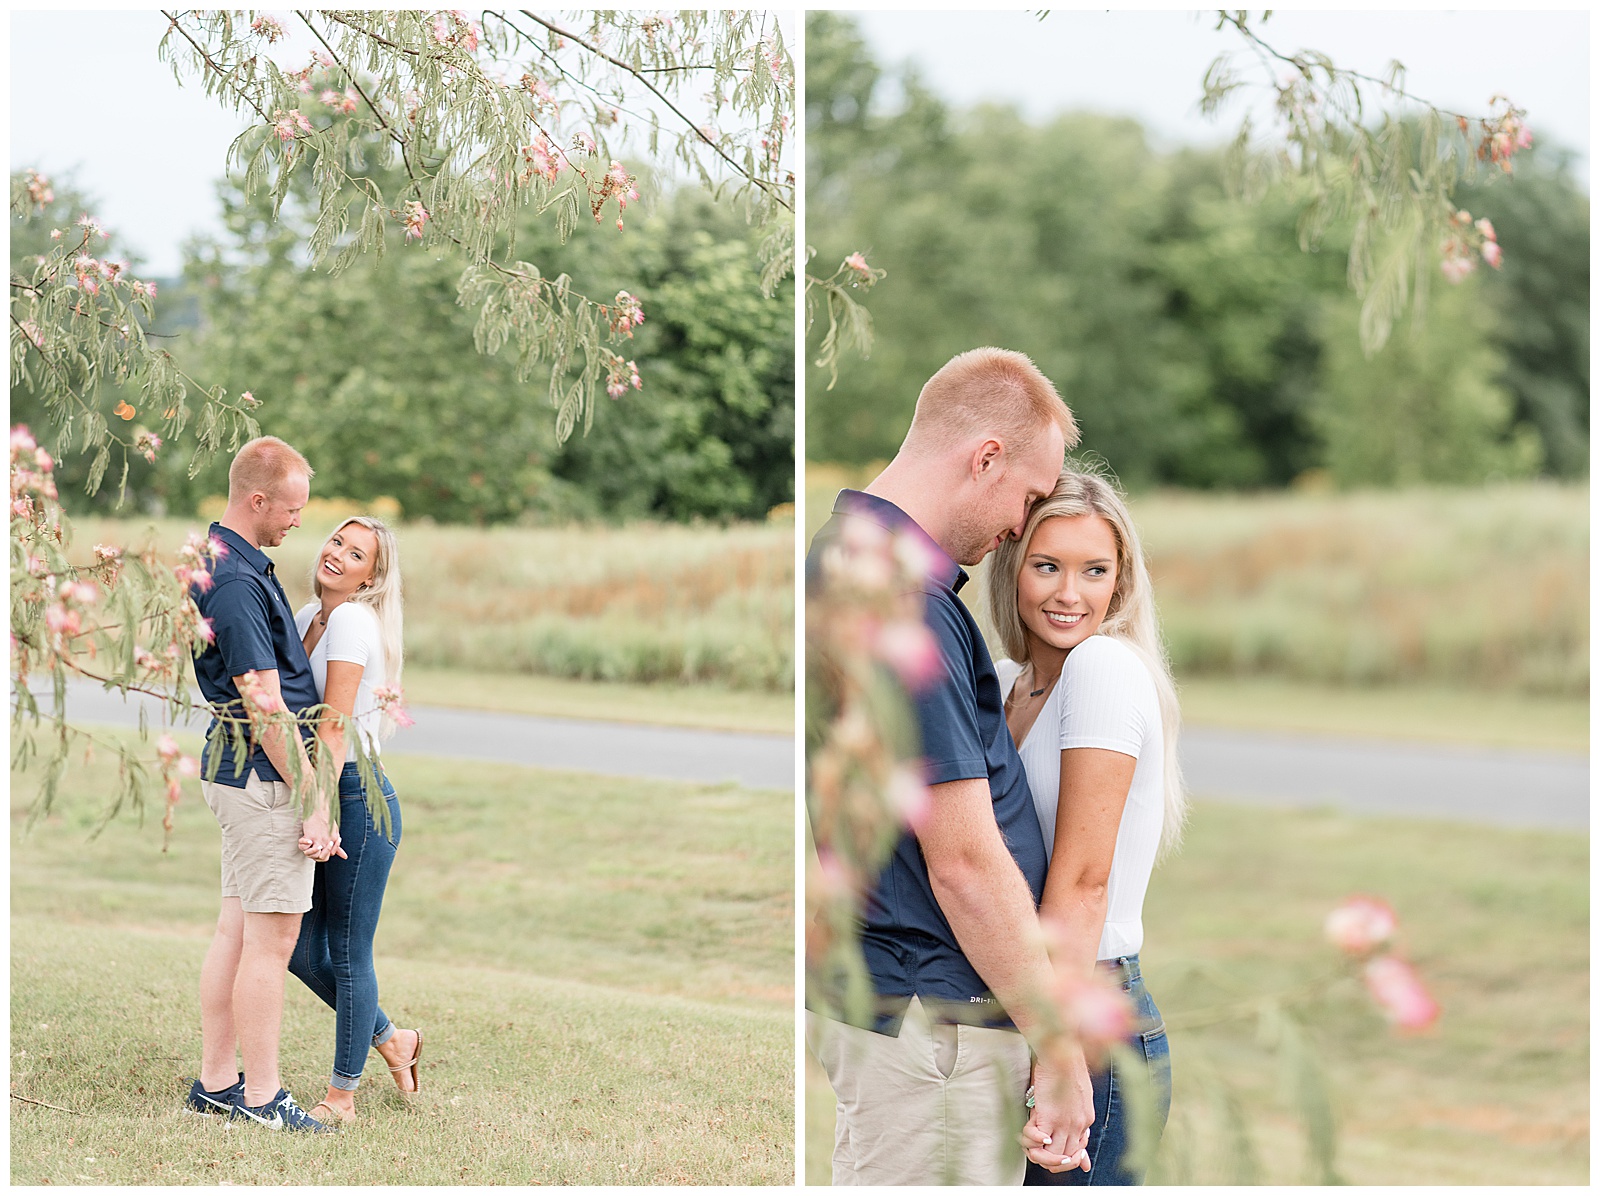 engagement session at Overlook Park with pink flowering tree around them